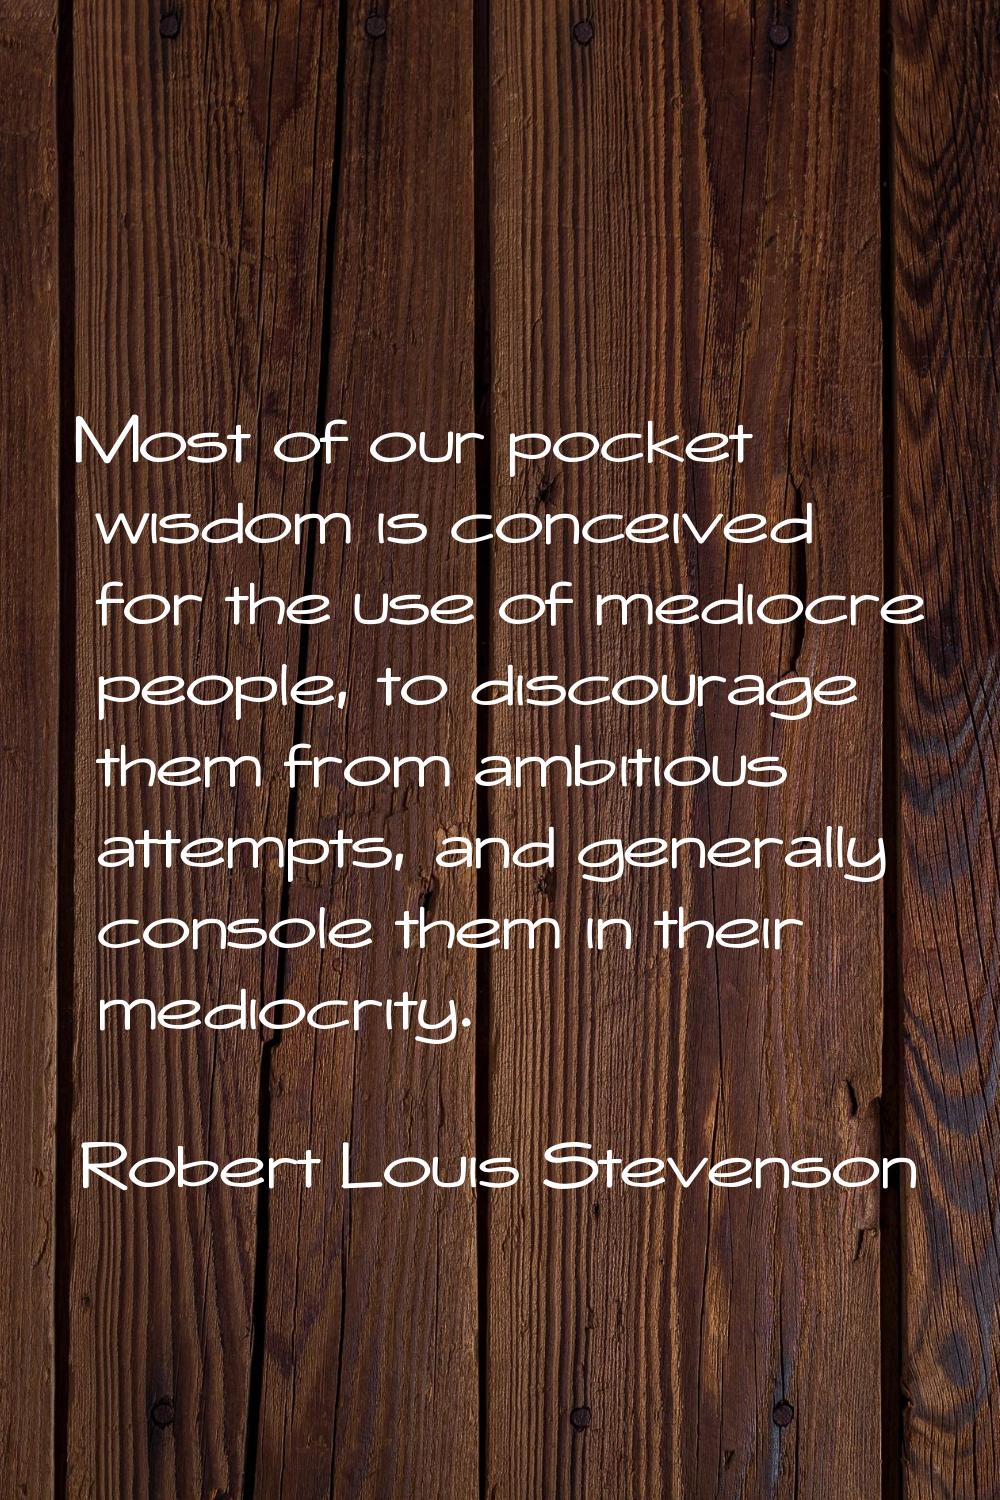 Most of our pocket wisdom is conceived for the use of mediocre people, to discourage them from ambi